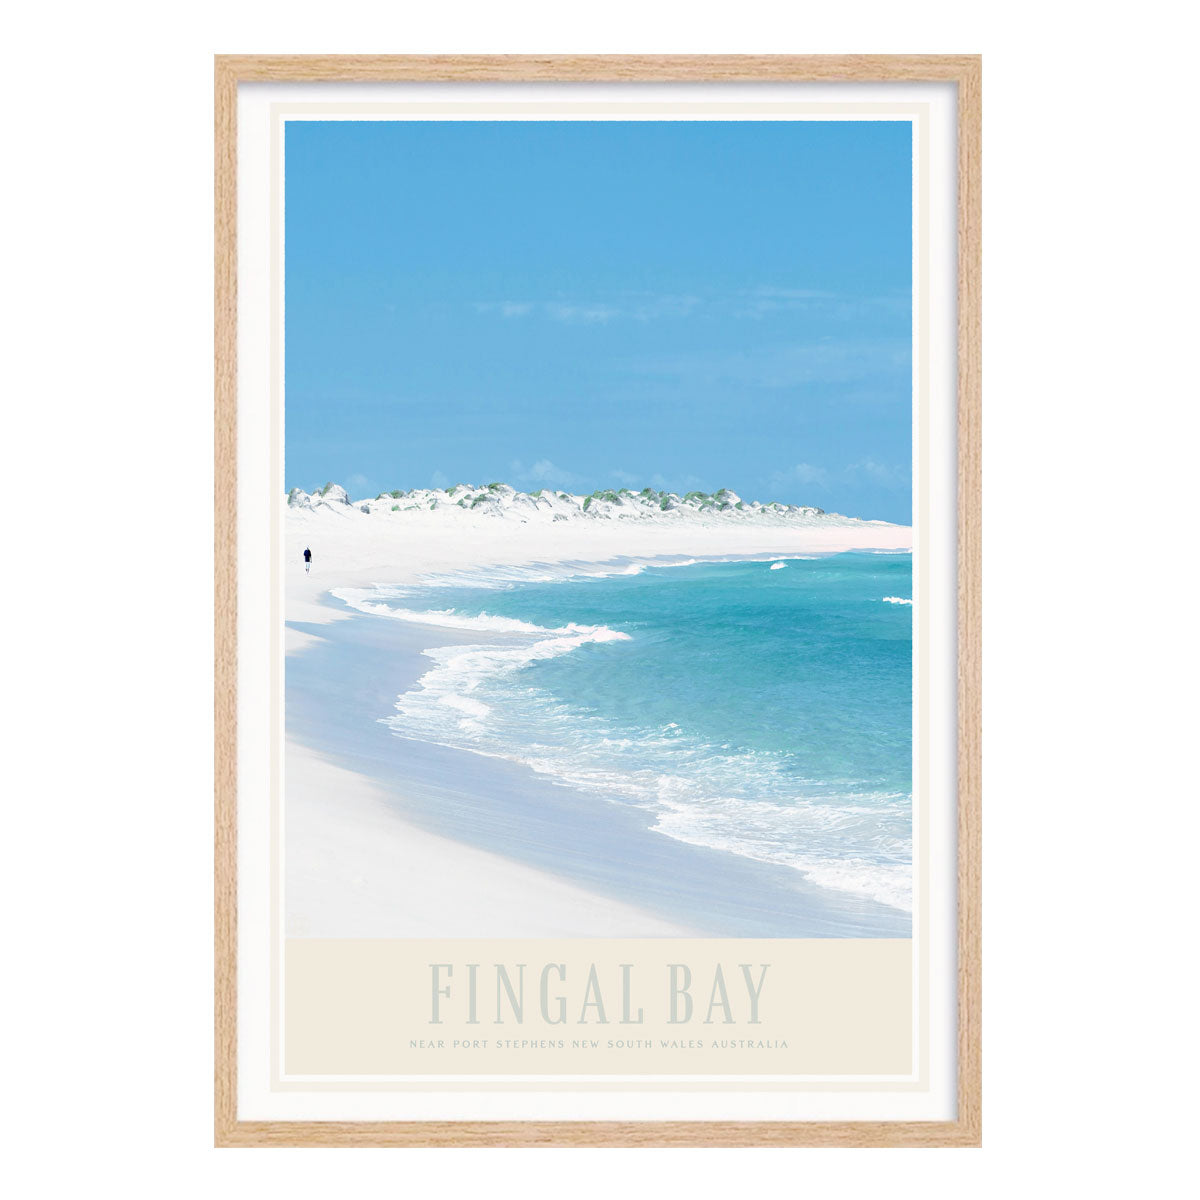 Fingal bay vintage retro poster print in oak frame by places we luv